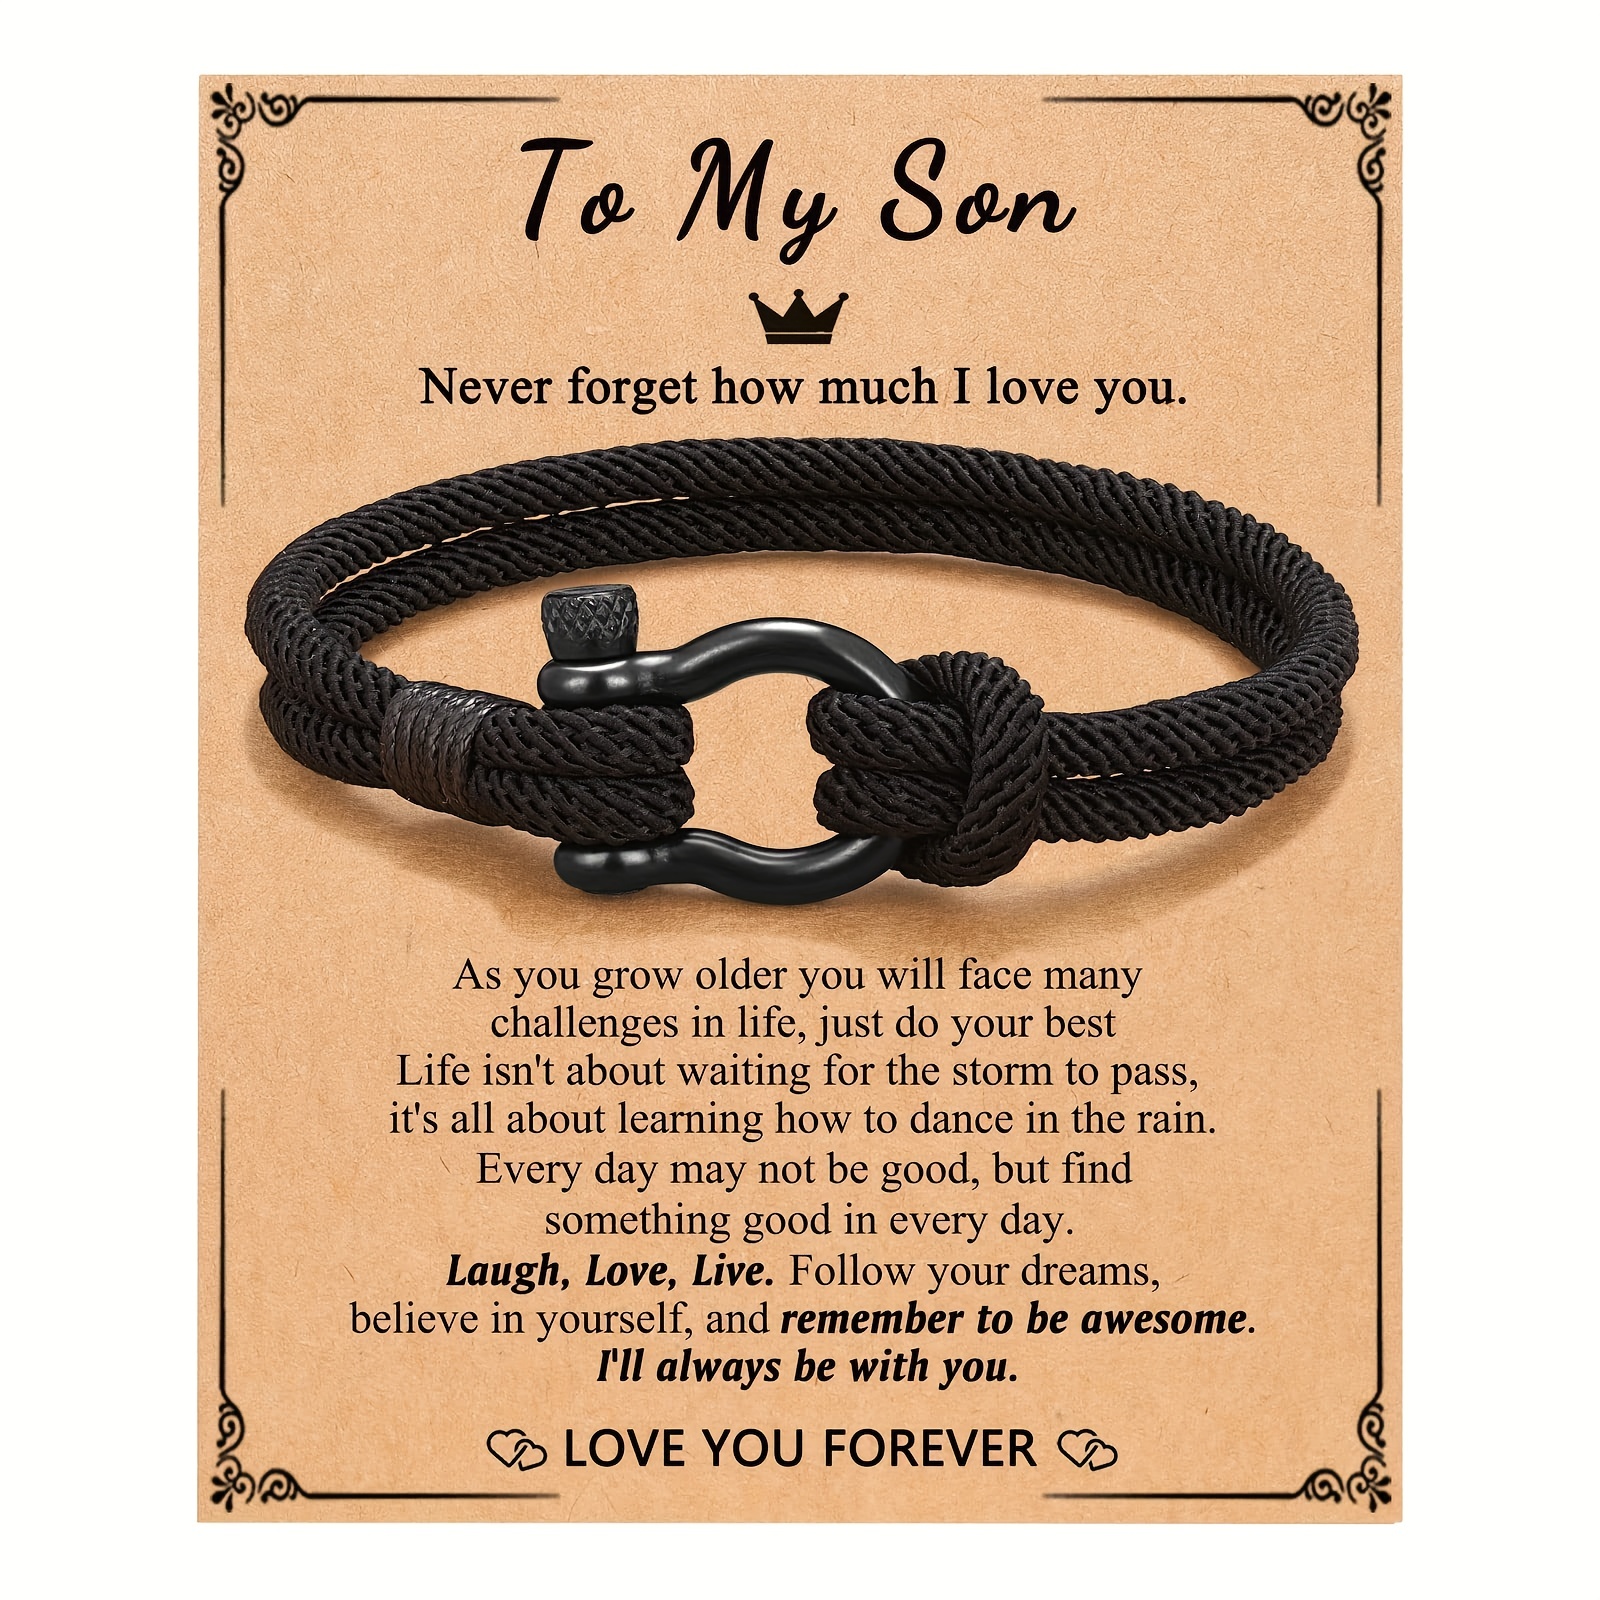 

To My Son/grandson Bracelet, Forever Linked Together Braided Leather Bracelet, Stainless Steel Magnetic Closure Leather Knot Cuff Wristband, Christmas Gifts Birthday Gifts